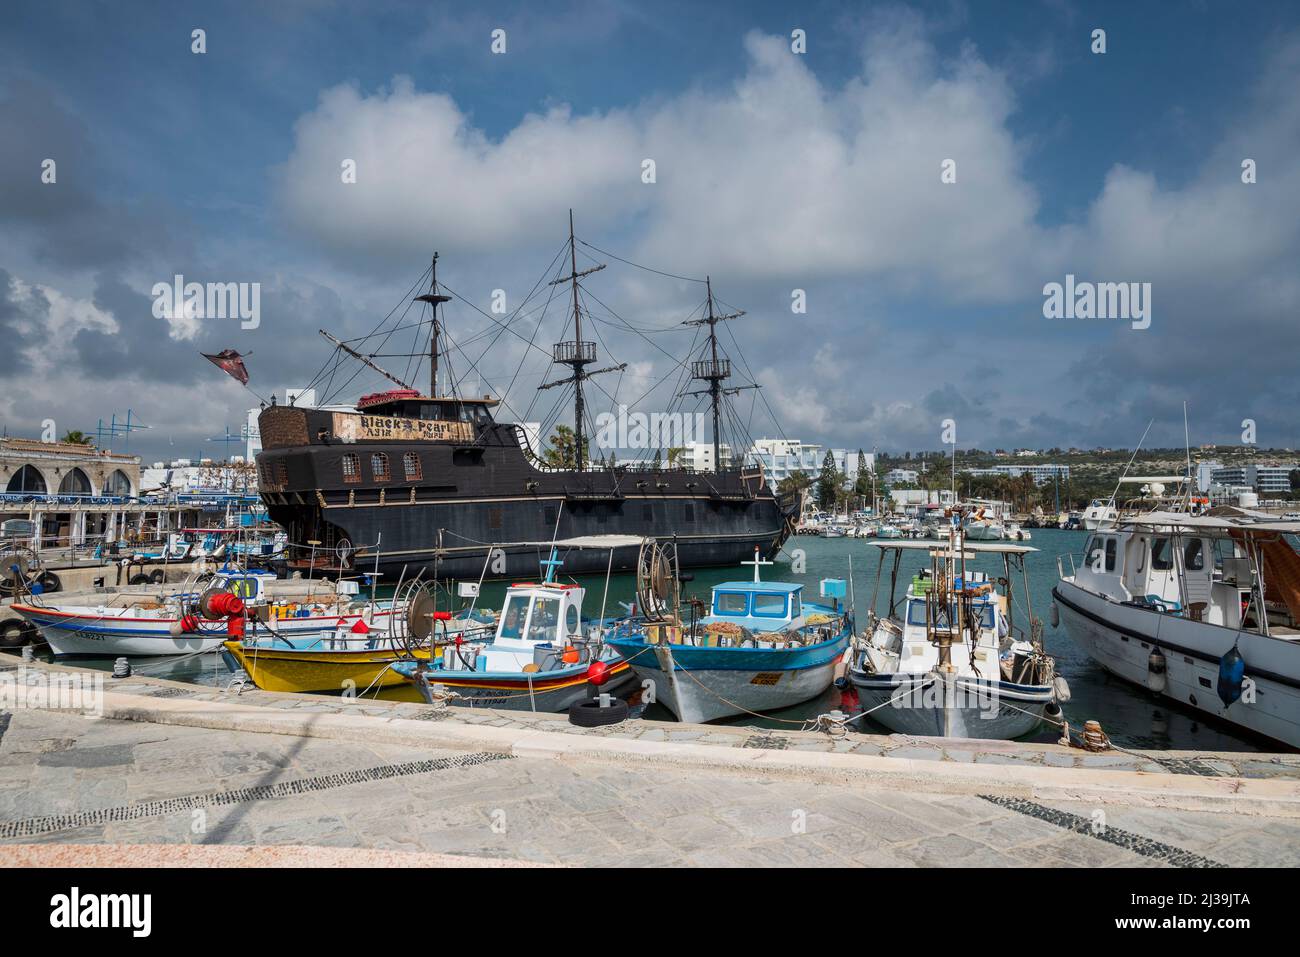 August 11, 2020 .Cyprus Ayia Napa .Promenade with pubes in the city for fishermen Stock Photo